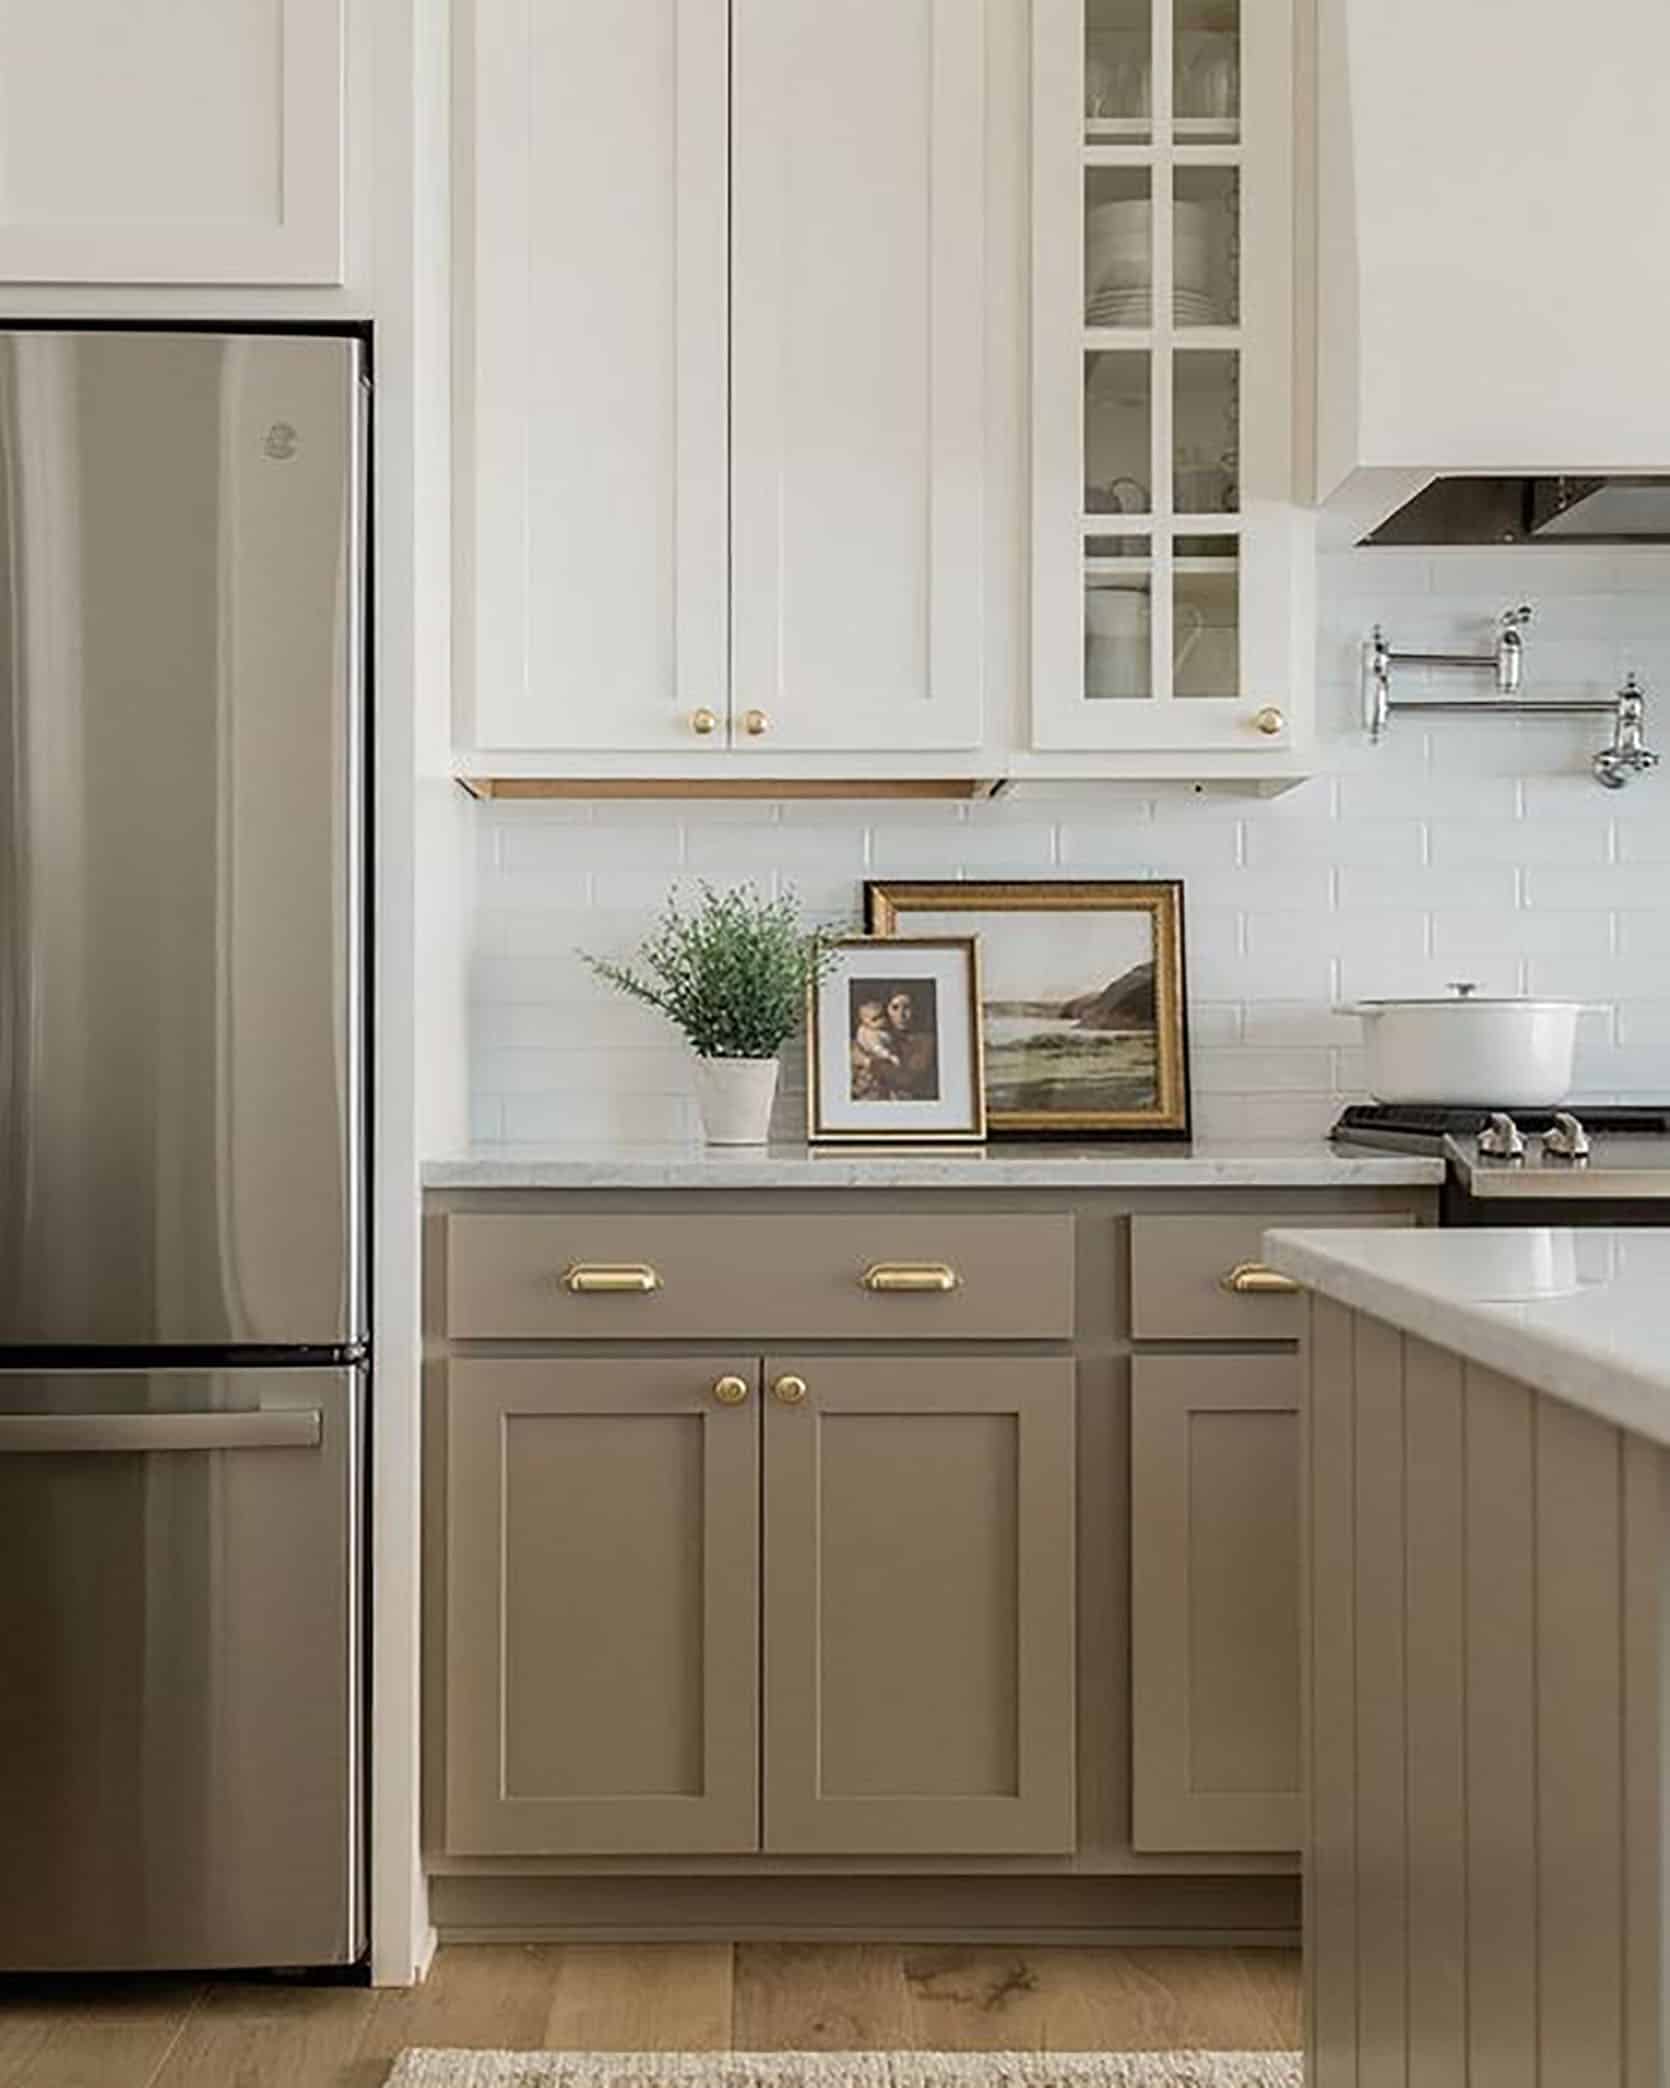 two tone painted kitchen cabinets ideas